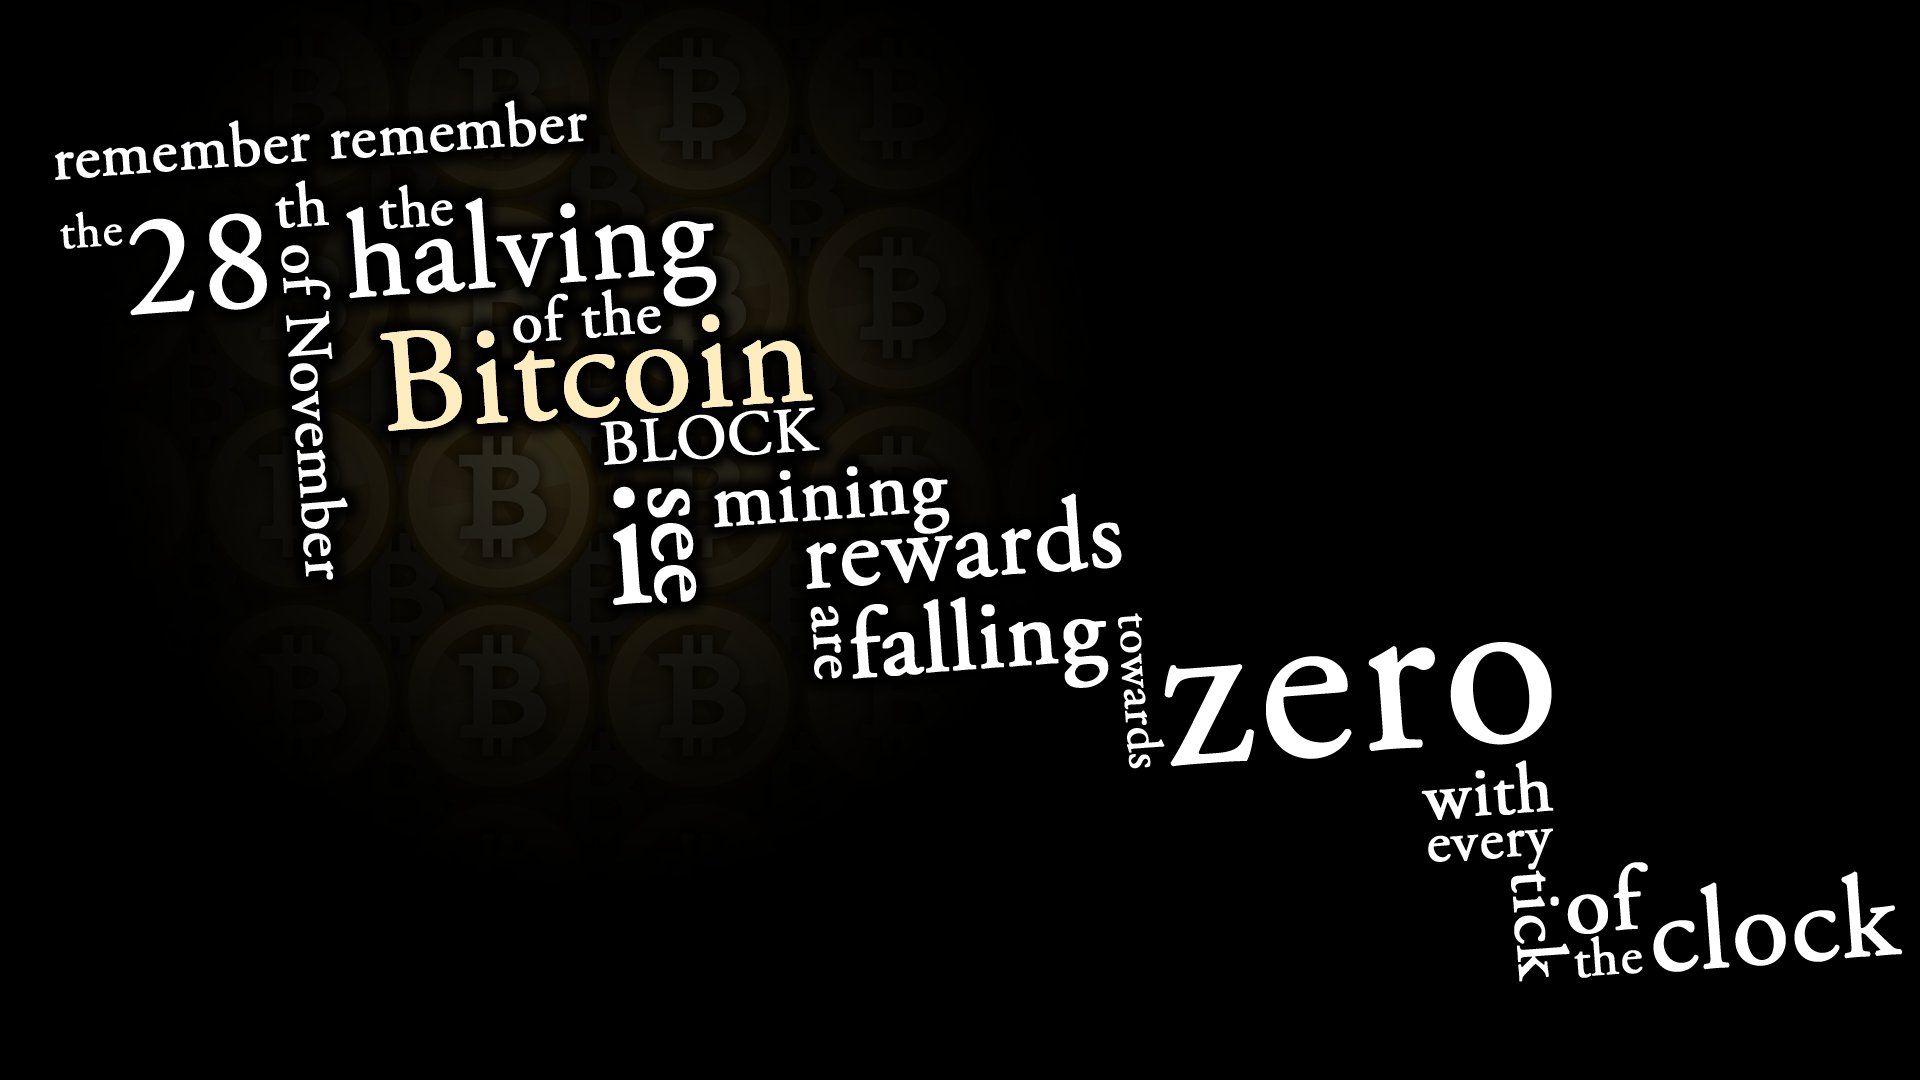 Wallpaper, 1920x1080 px, Bitcoin, coins, computer, internet, money, poster, test, typography 1920x1080